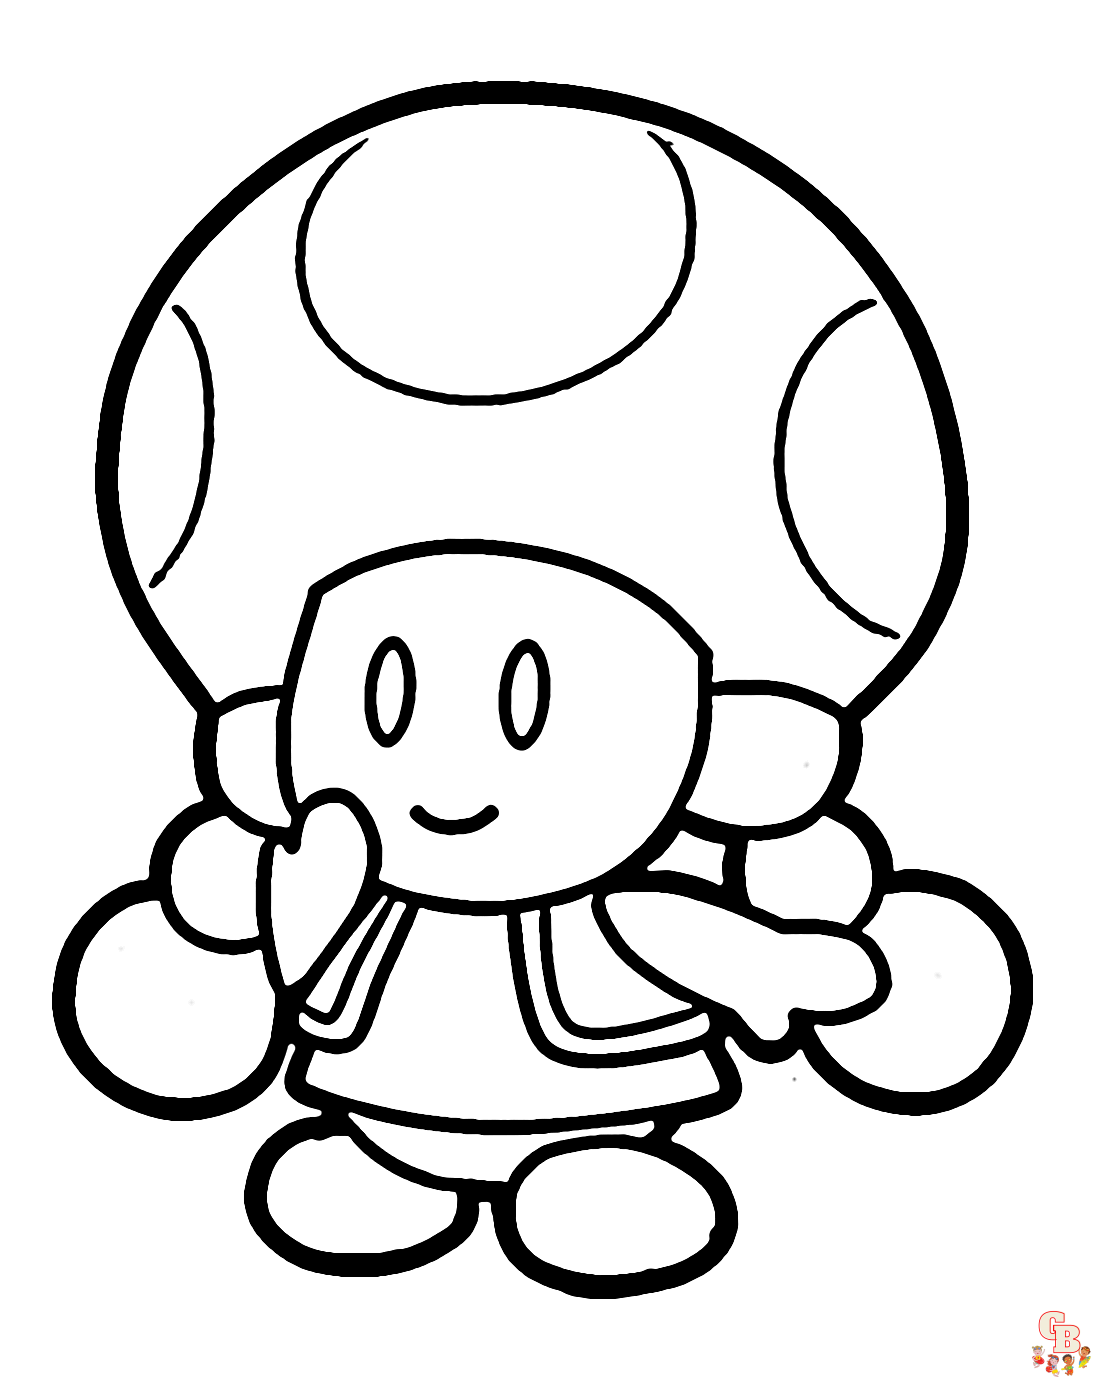 toadette coloring pages printable